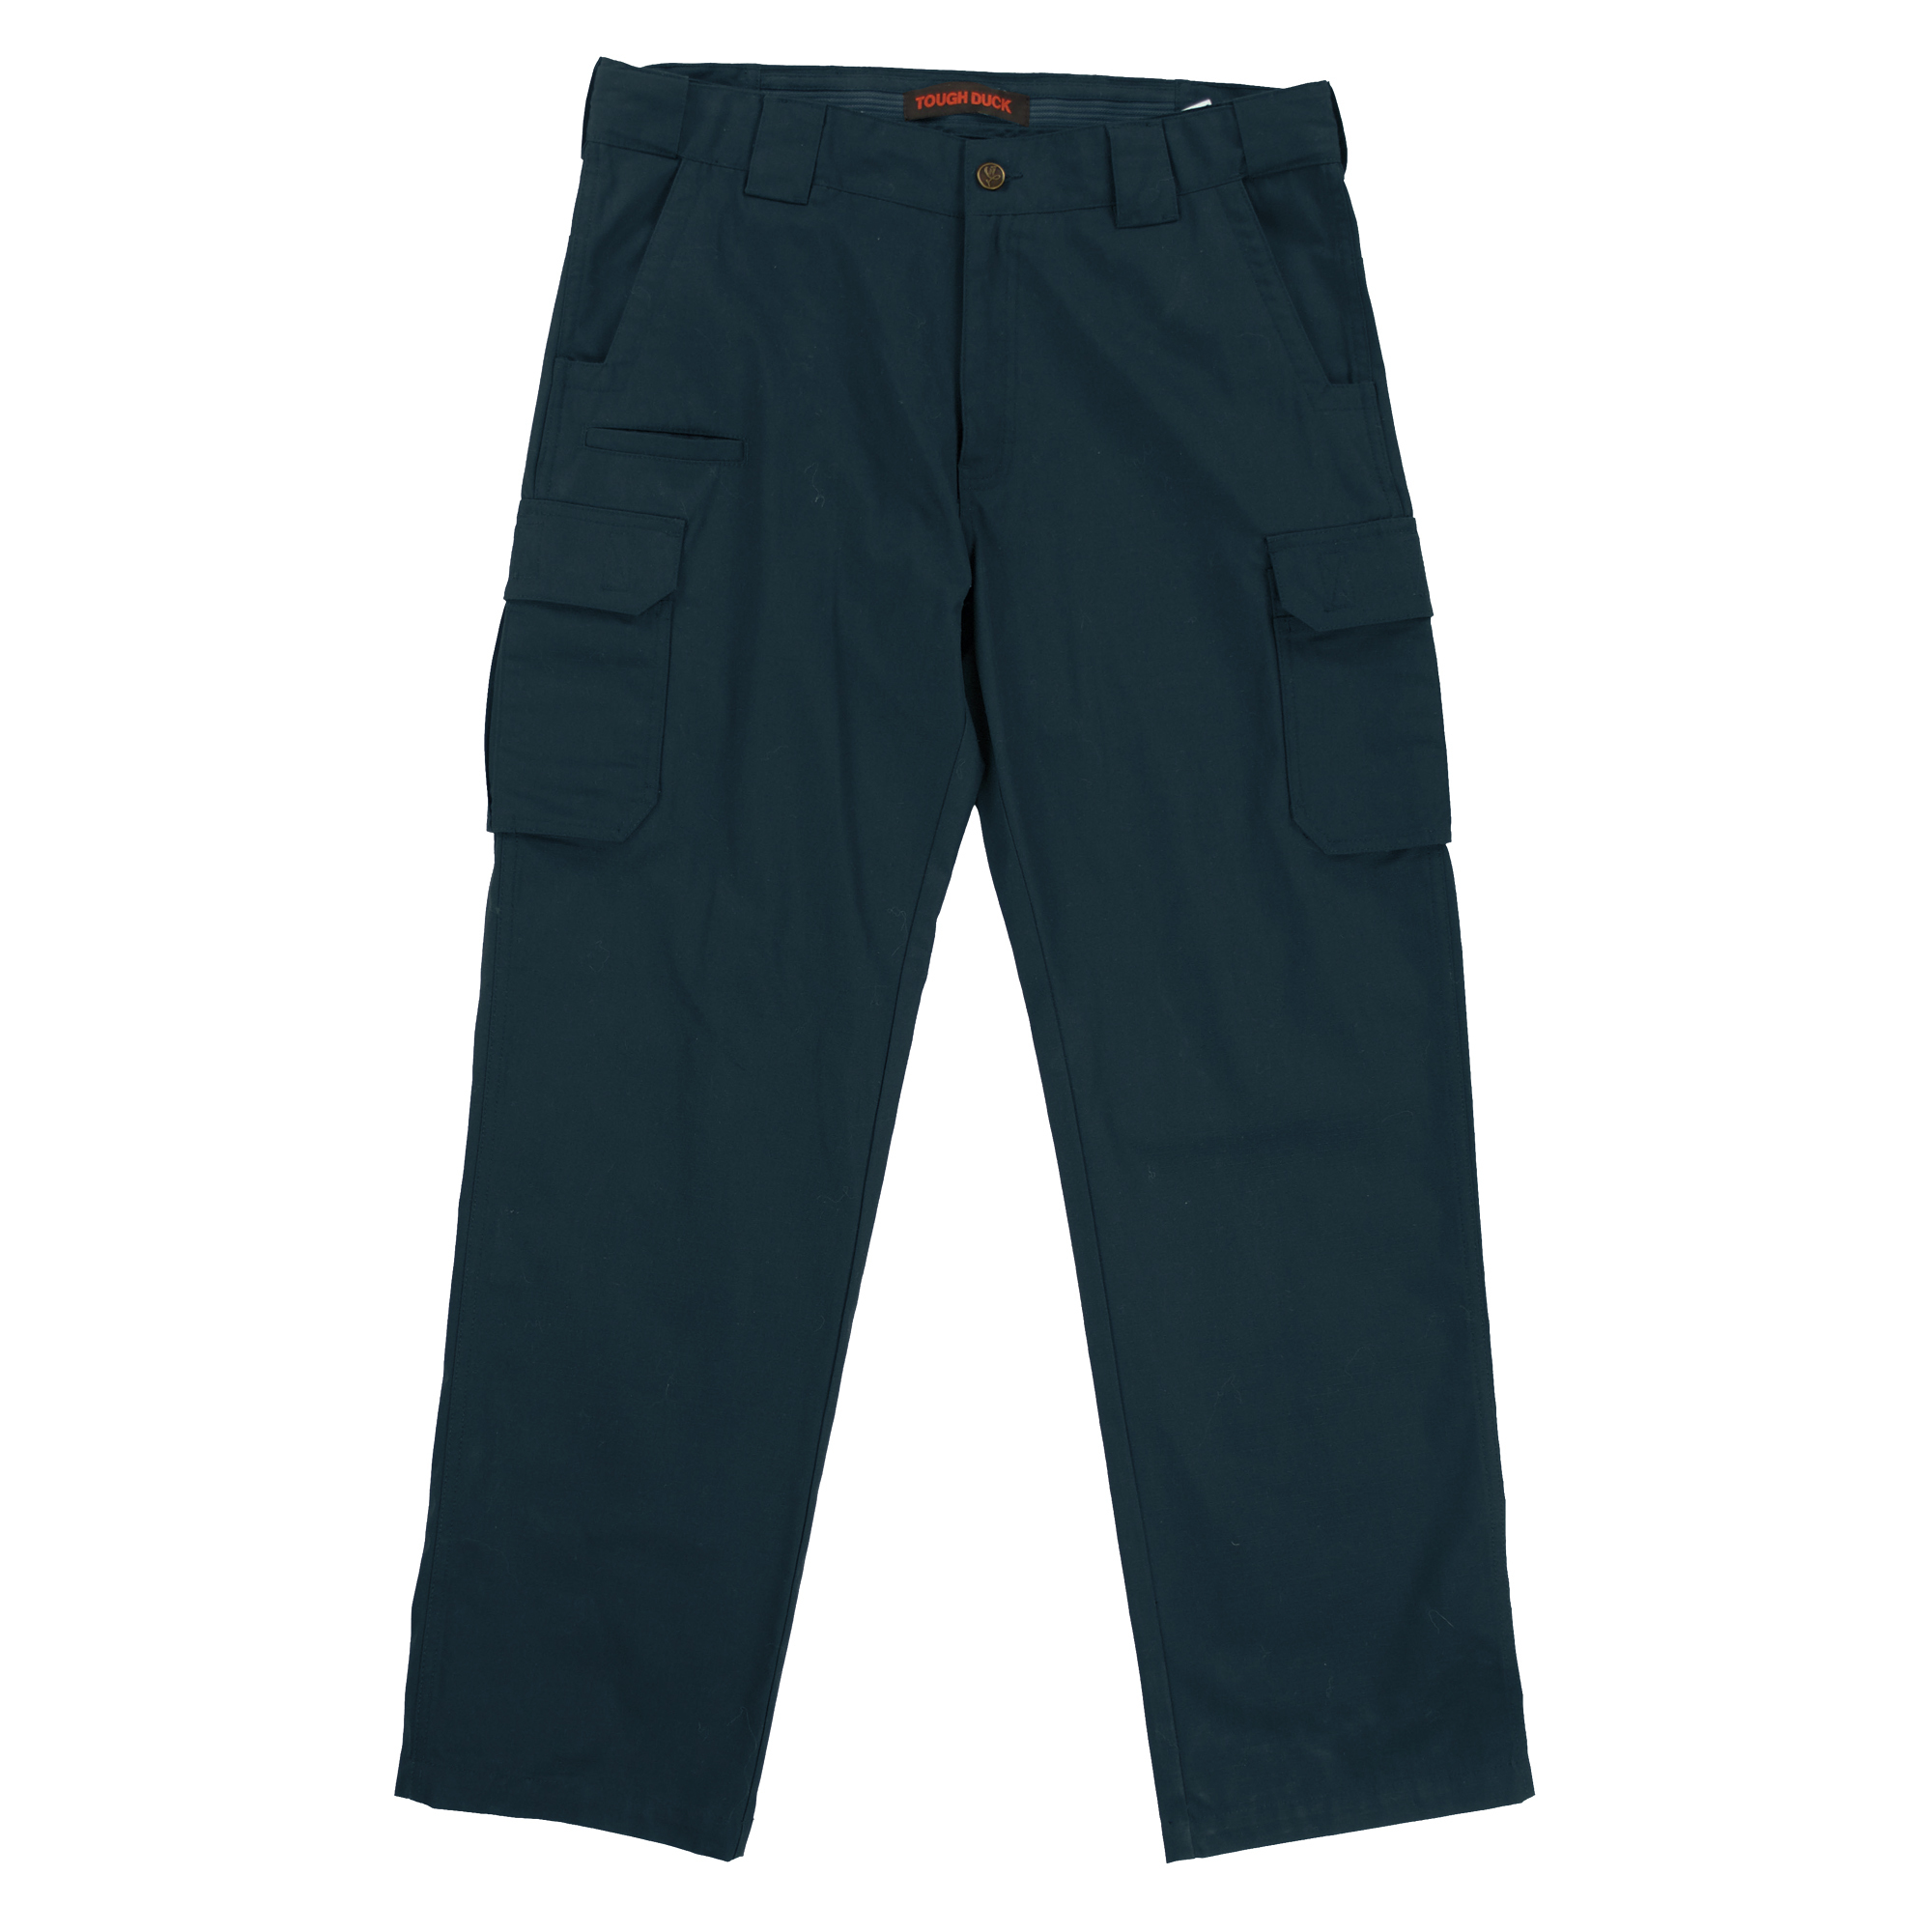 Tough Duck, Ripstop Cargo Pant, Waist 40 in, Inseam 30 in, Color Navy, Model WP110